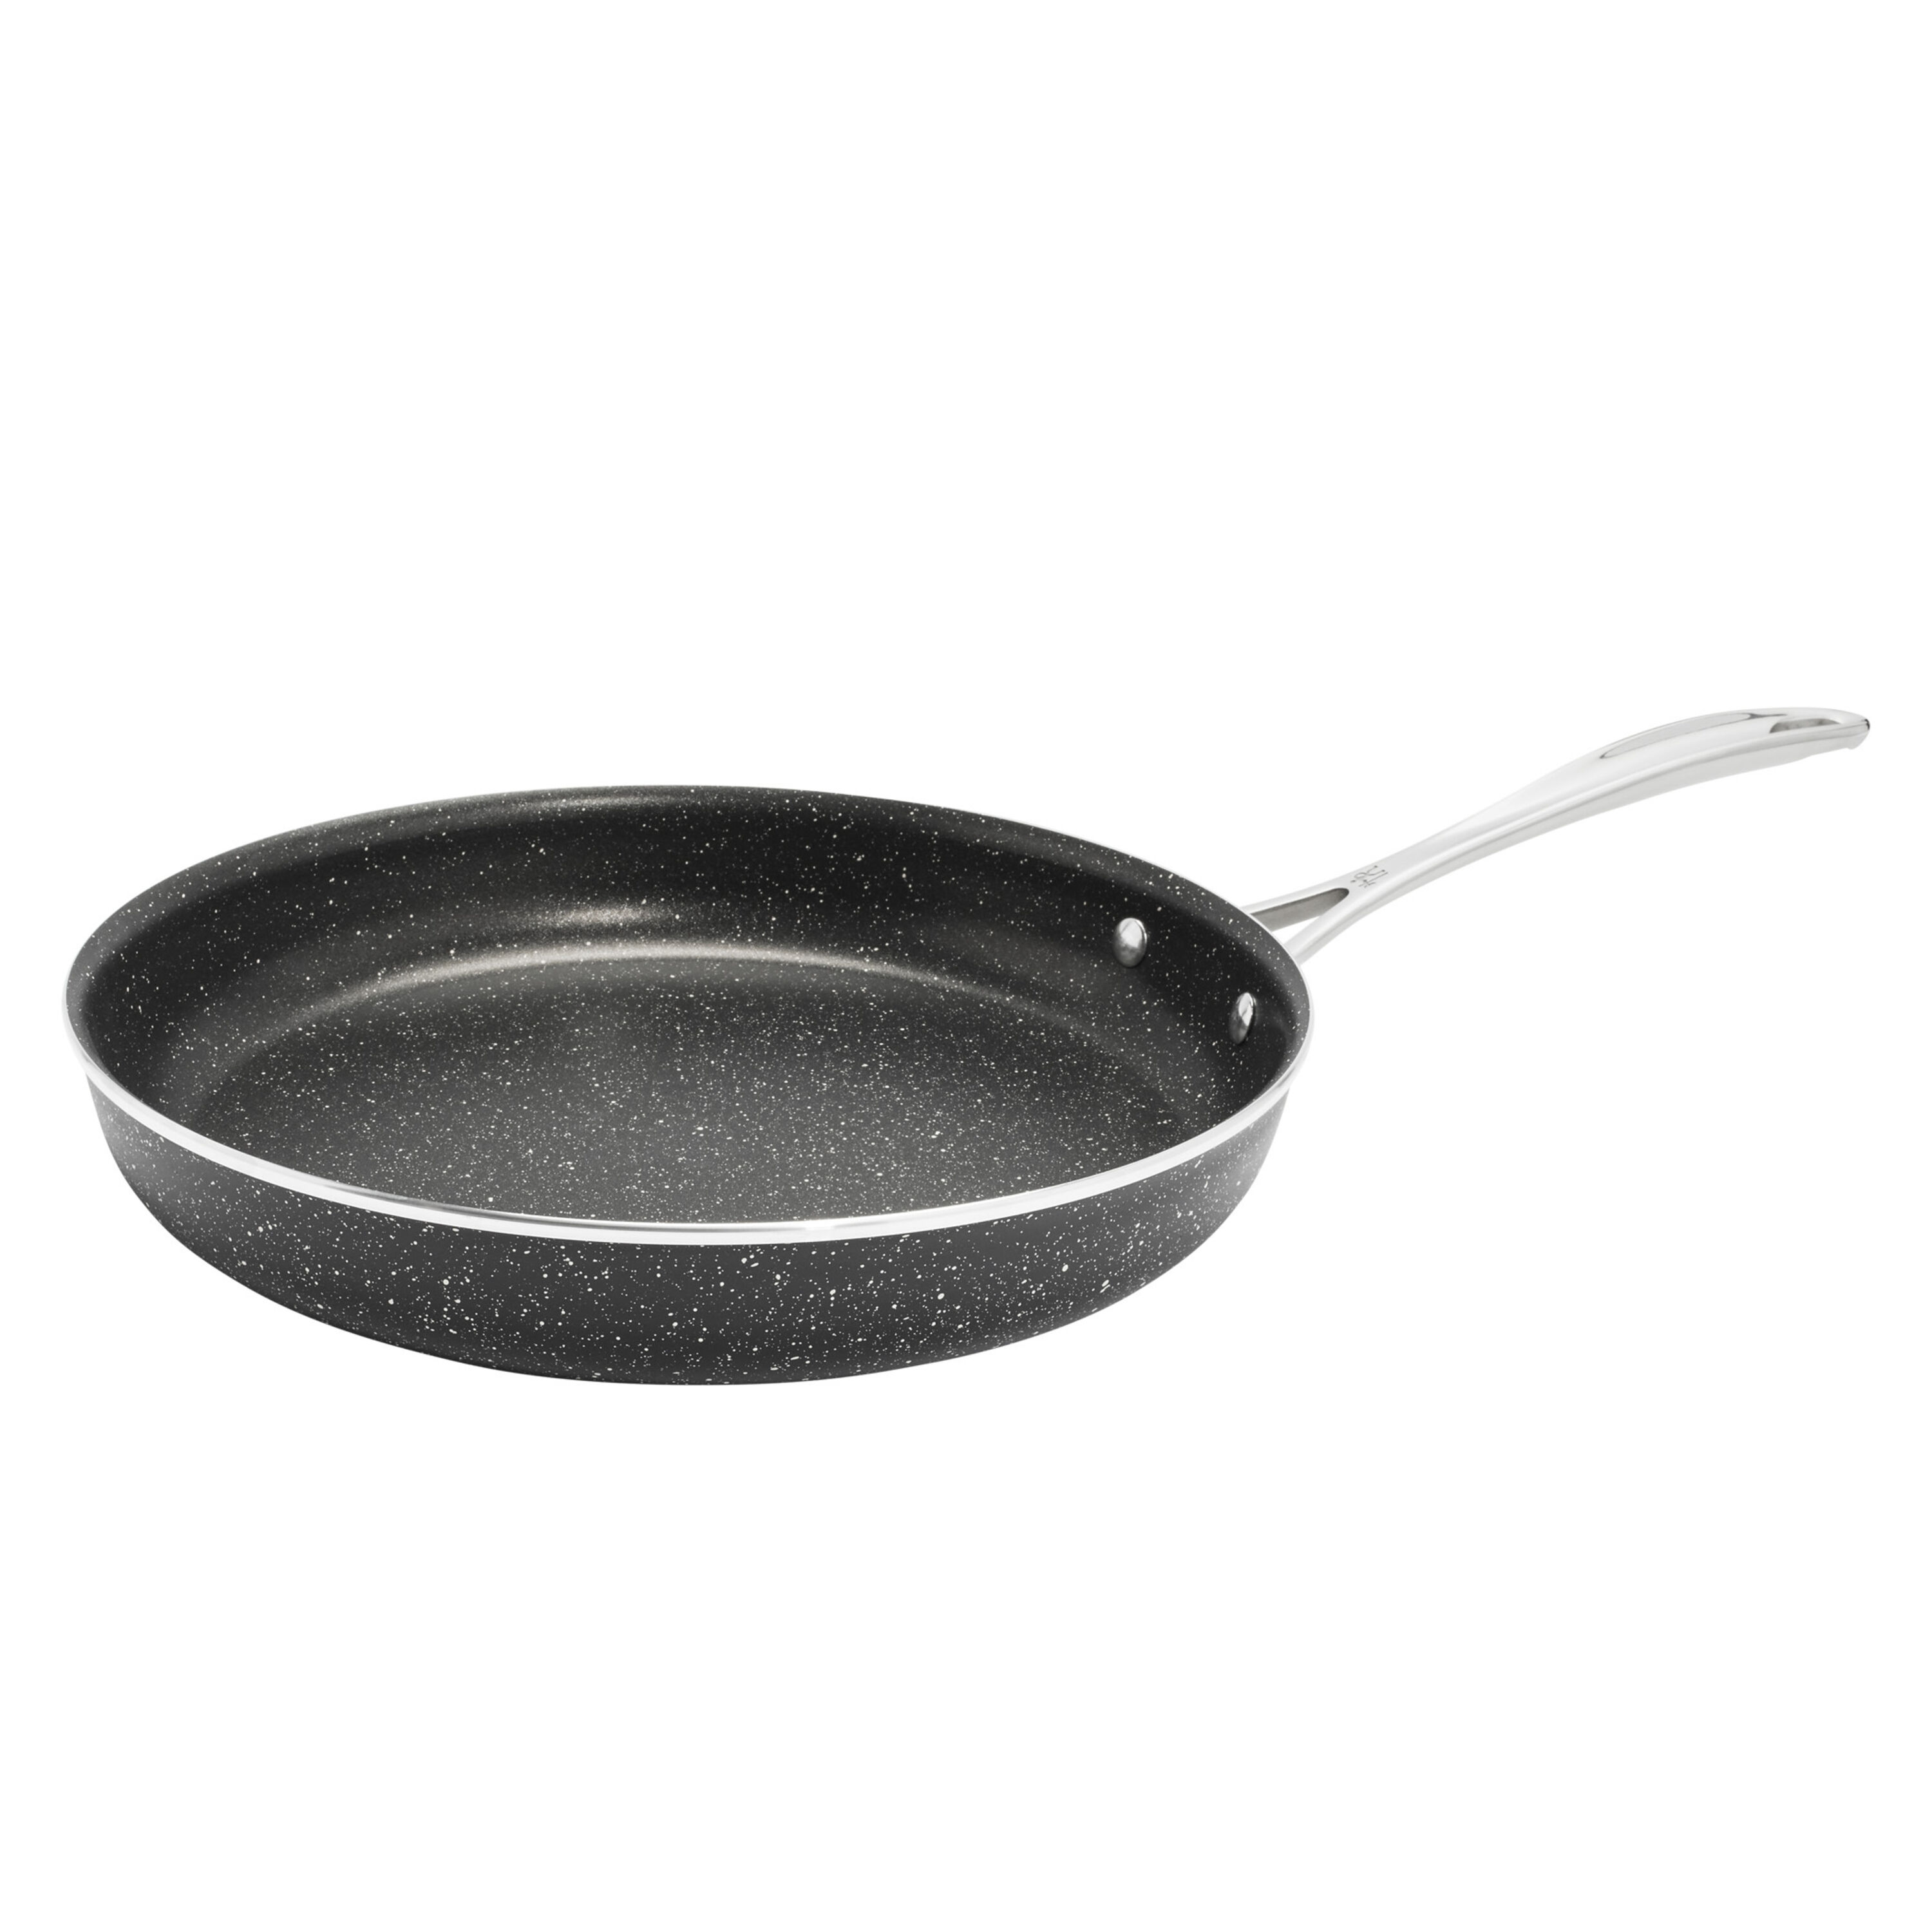 Henckels Everlift 8-inch Granitium Nonstick Frying Pan, Made in Italy,  durable 3-layer granite-hued nonstick coating from recycled materials, Oven